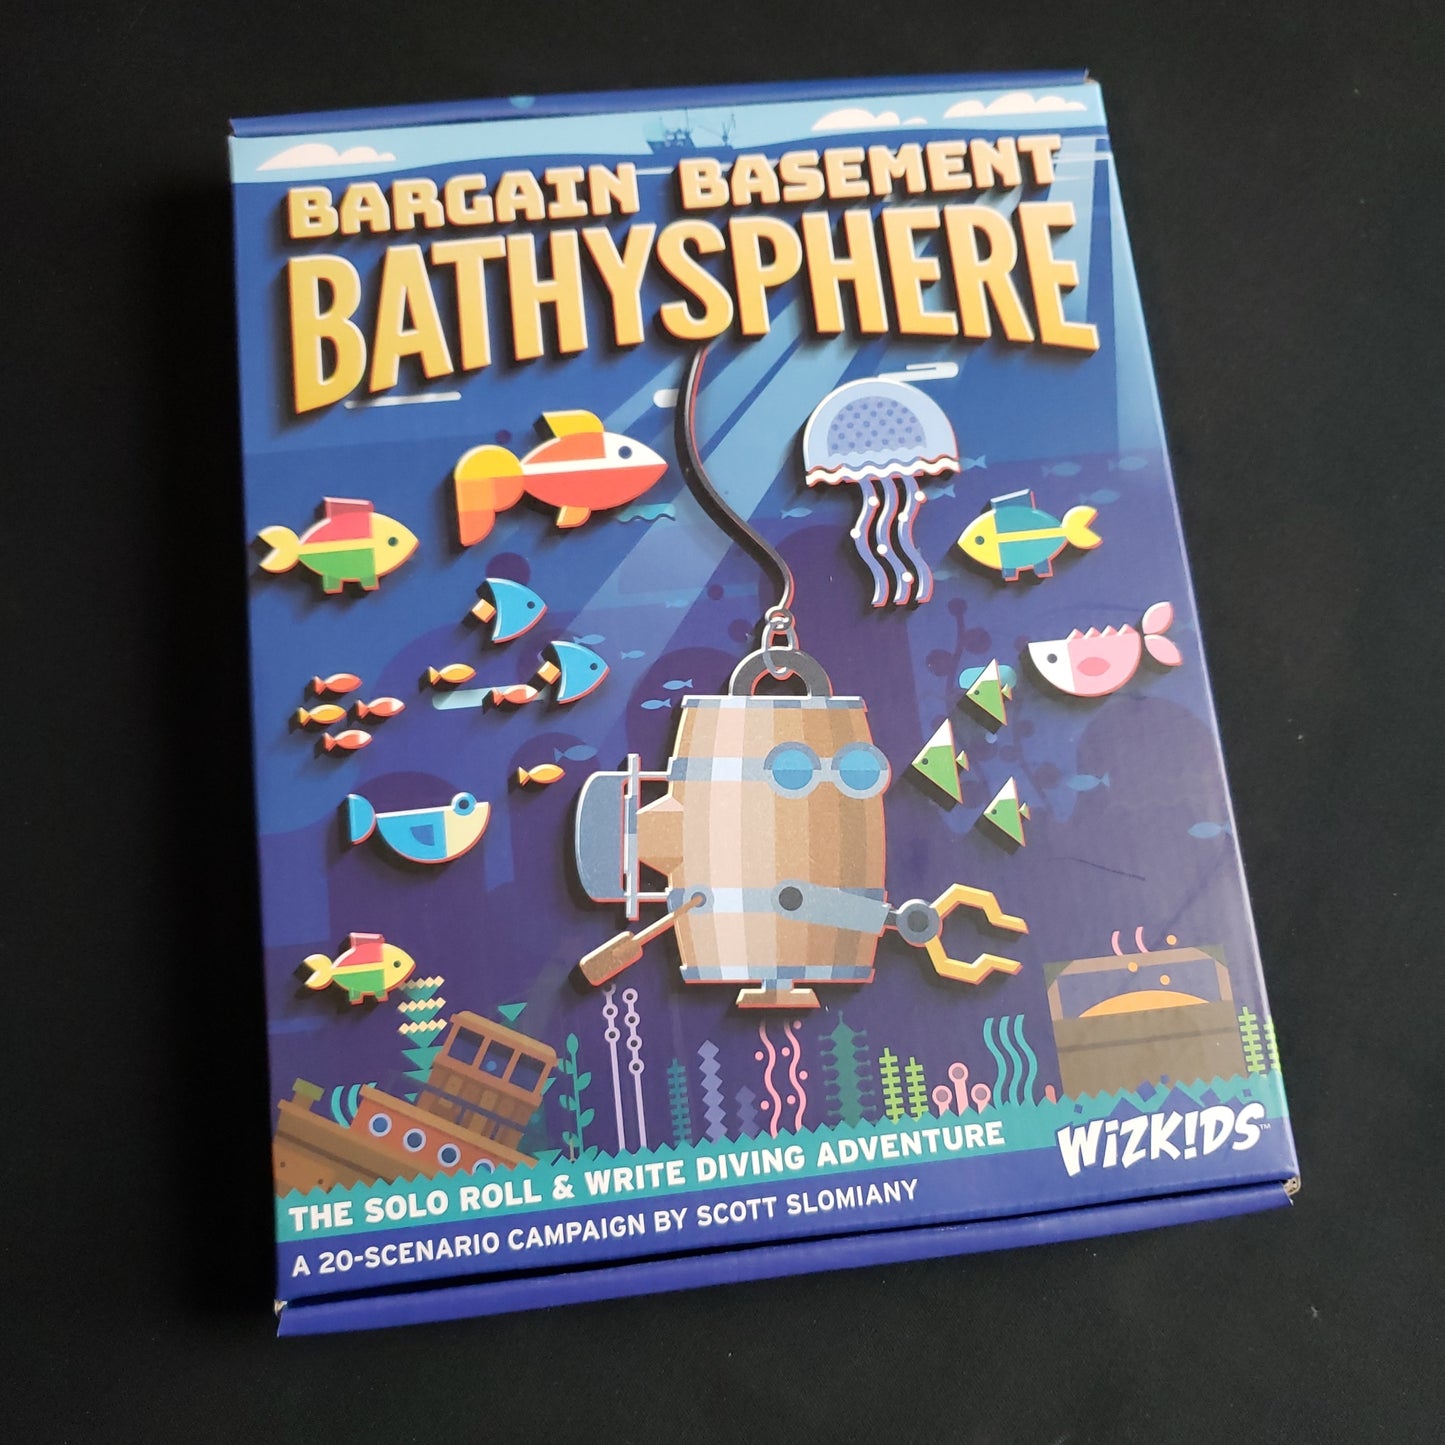 Image shows the front cover of the box of the Bargain Basement Bathysphere board game